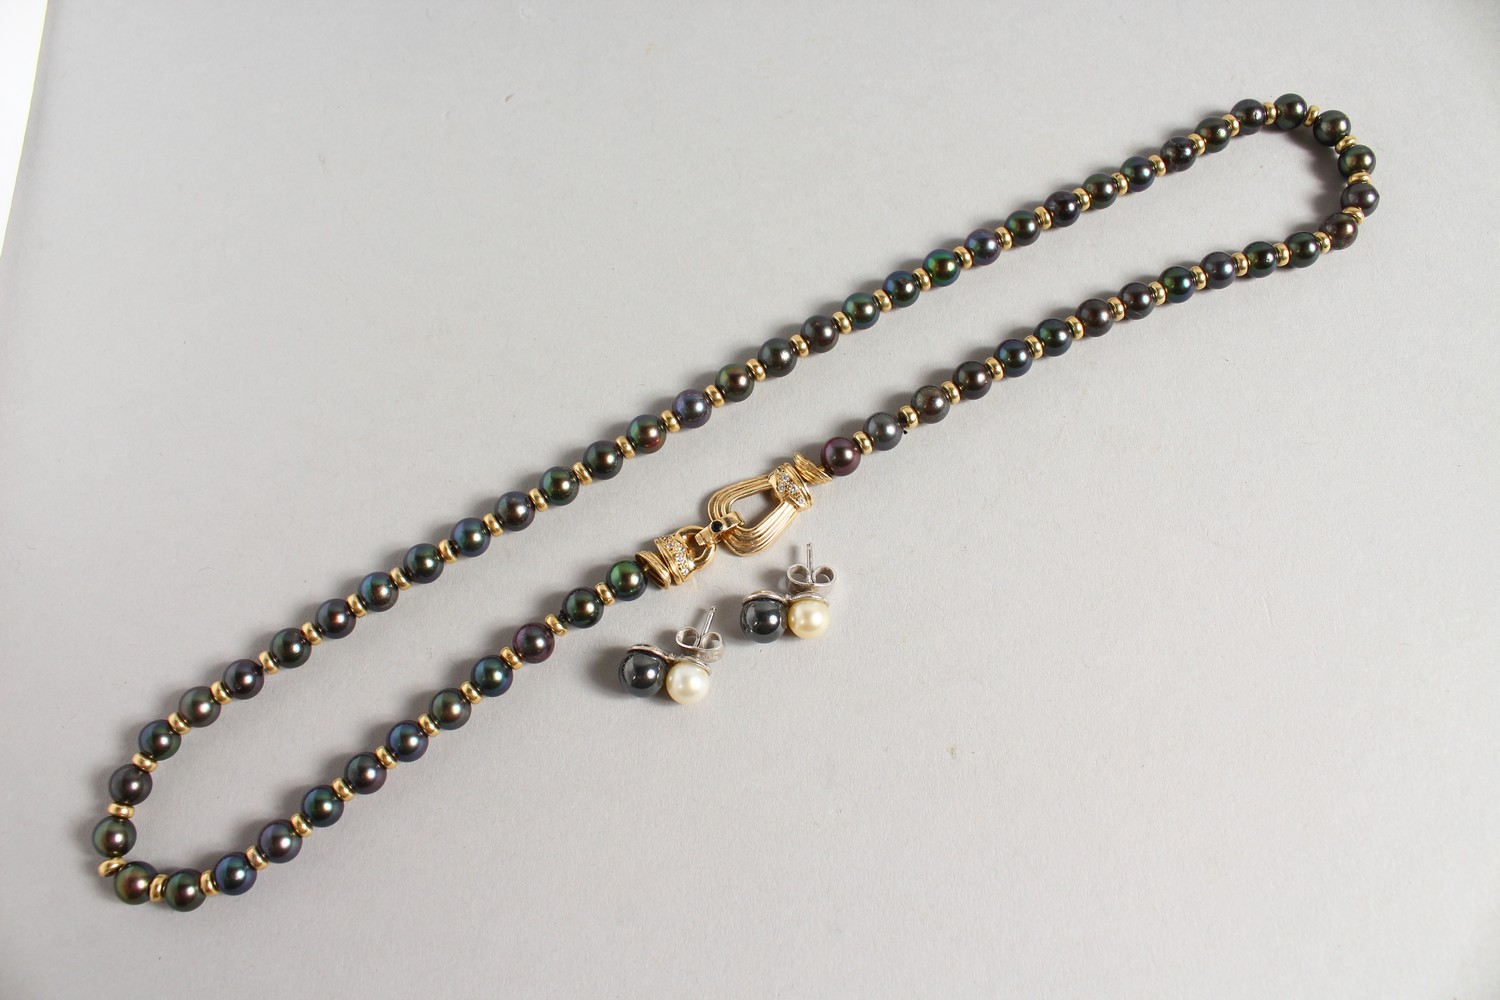 A GOOD BLACK PEARL NECKLACE, with ornate gold and diamond clasp, with a pair of similar earrings. - Image 4 of 5